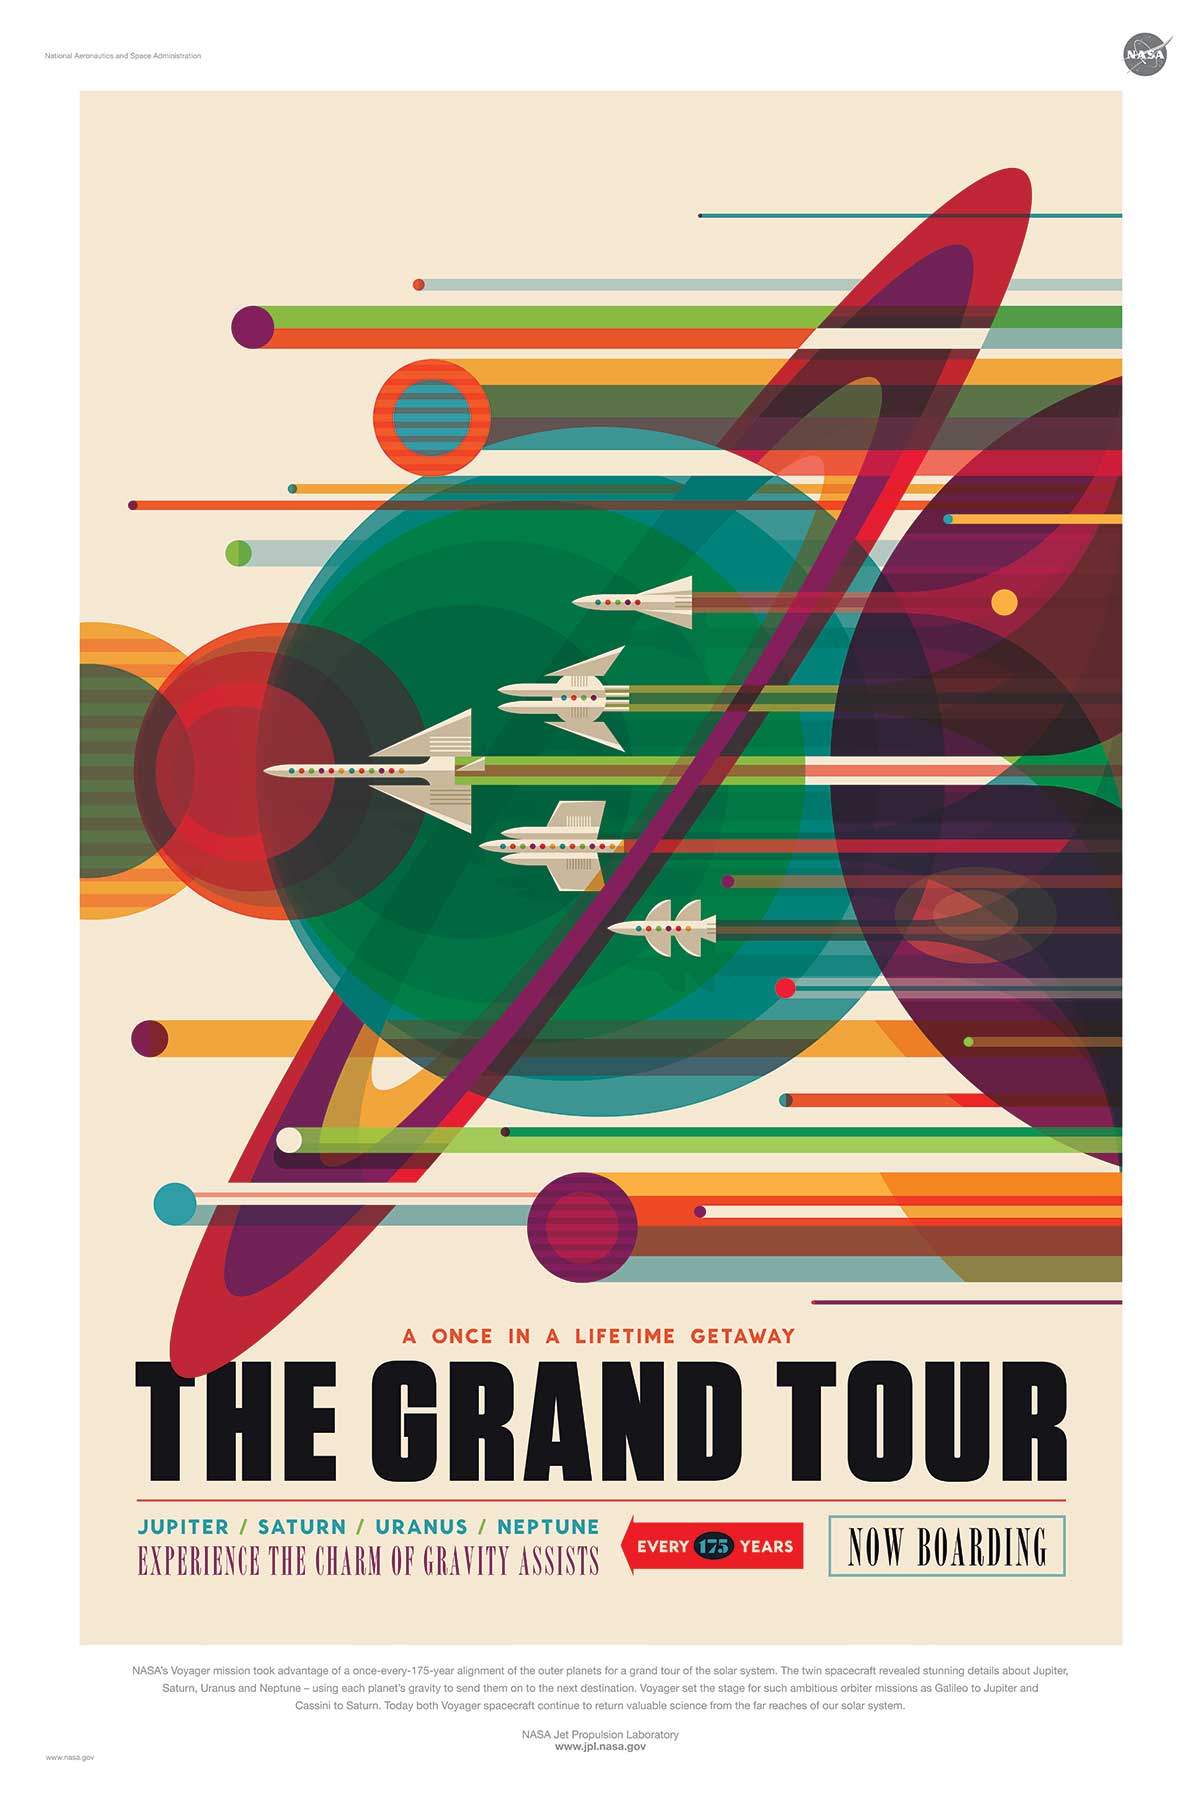 NASA poster promoting space travel around the solar system